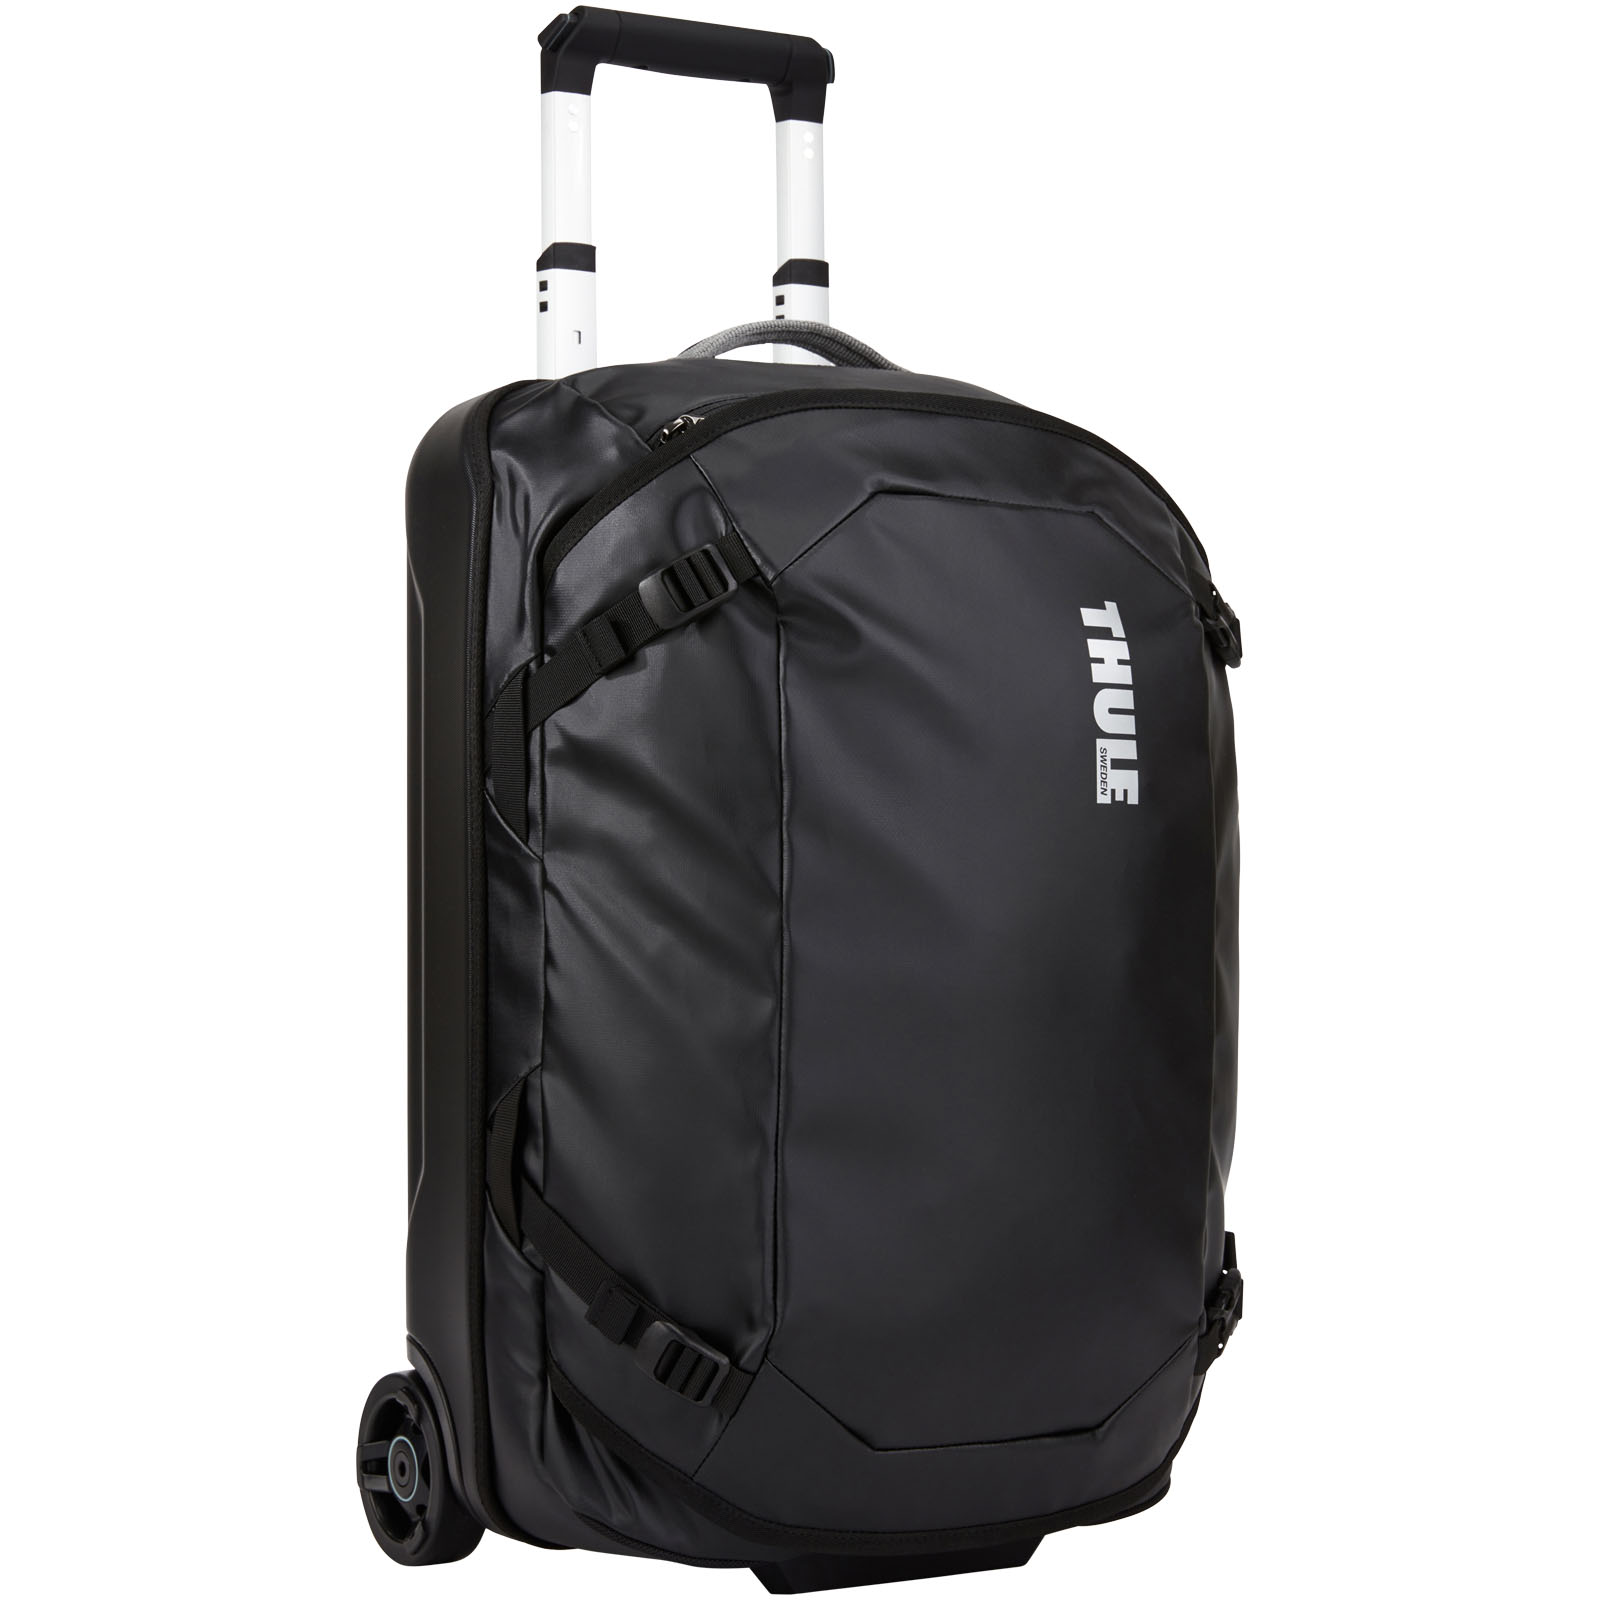 Weather Resistant Carry-On Travel Bag - Bromborough